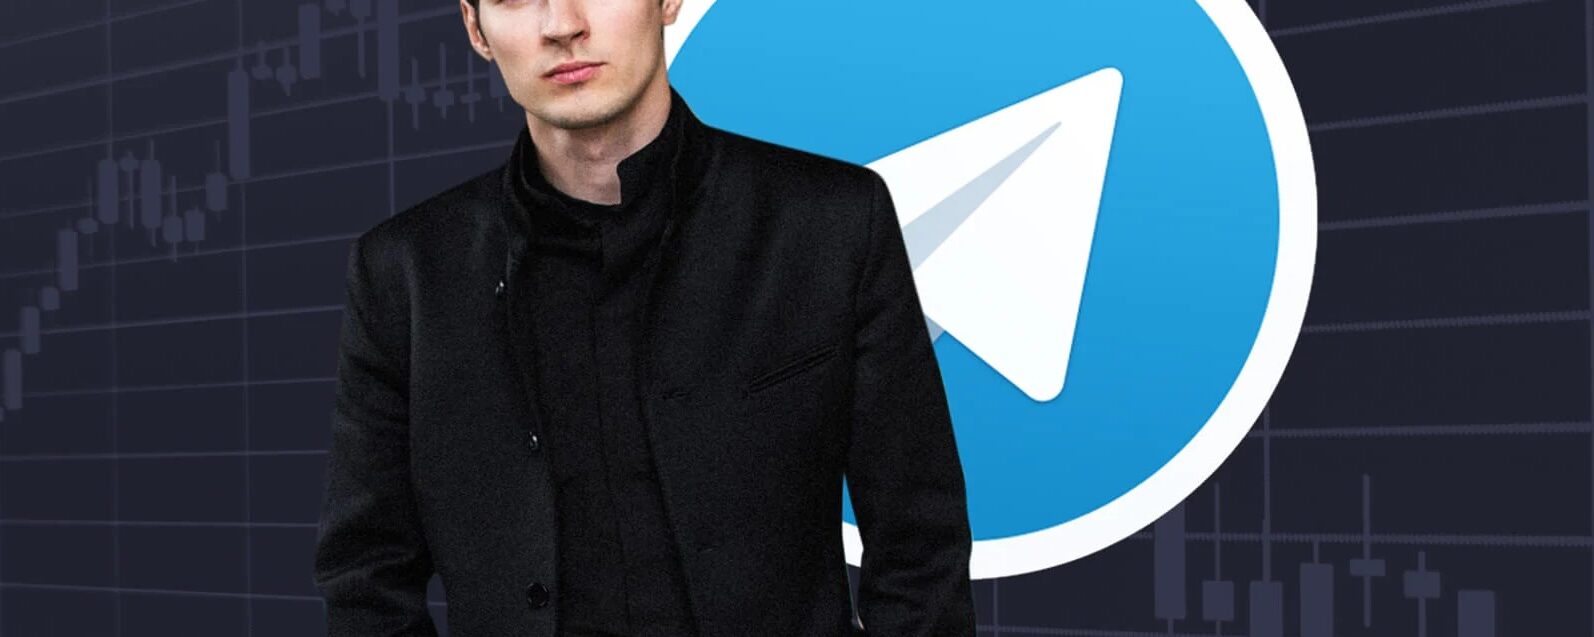 Telegram will introduce monetization of advertising revenues in channels